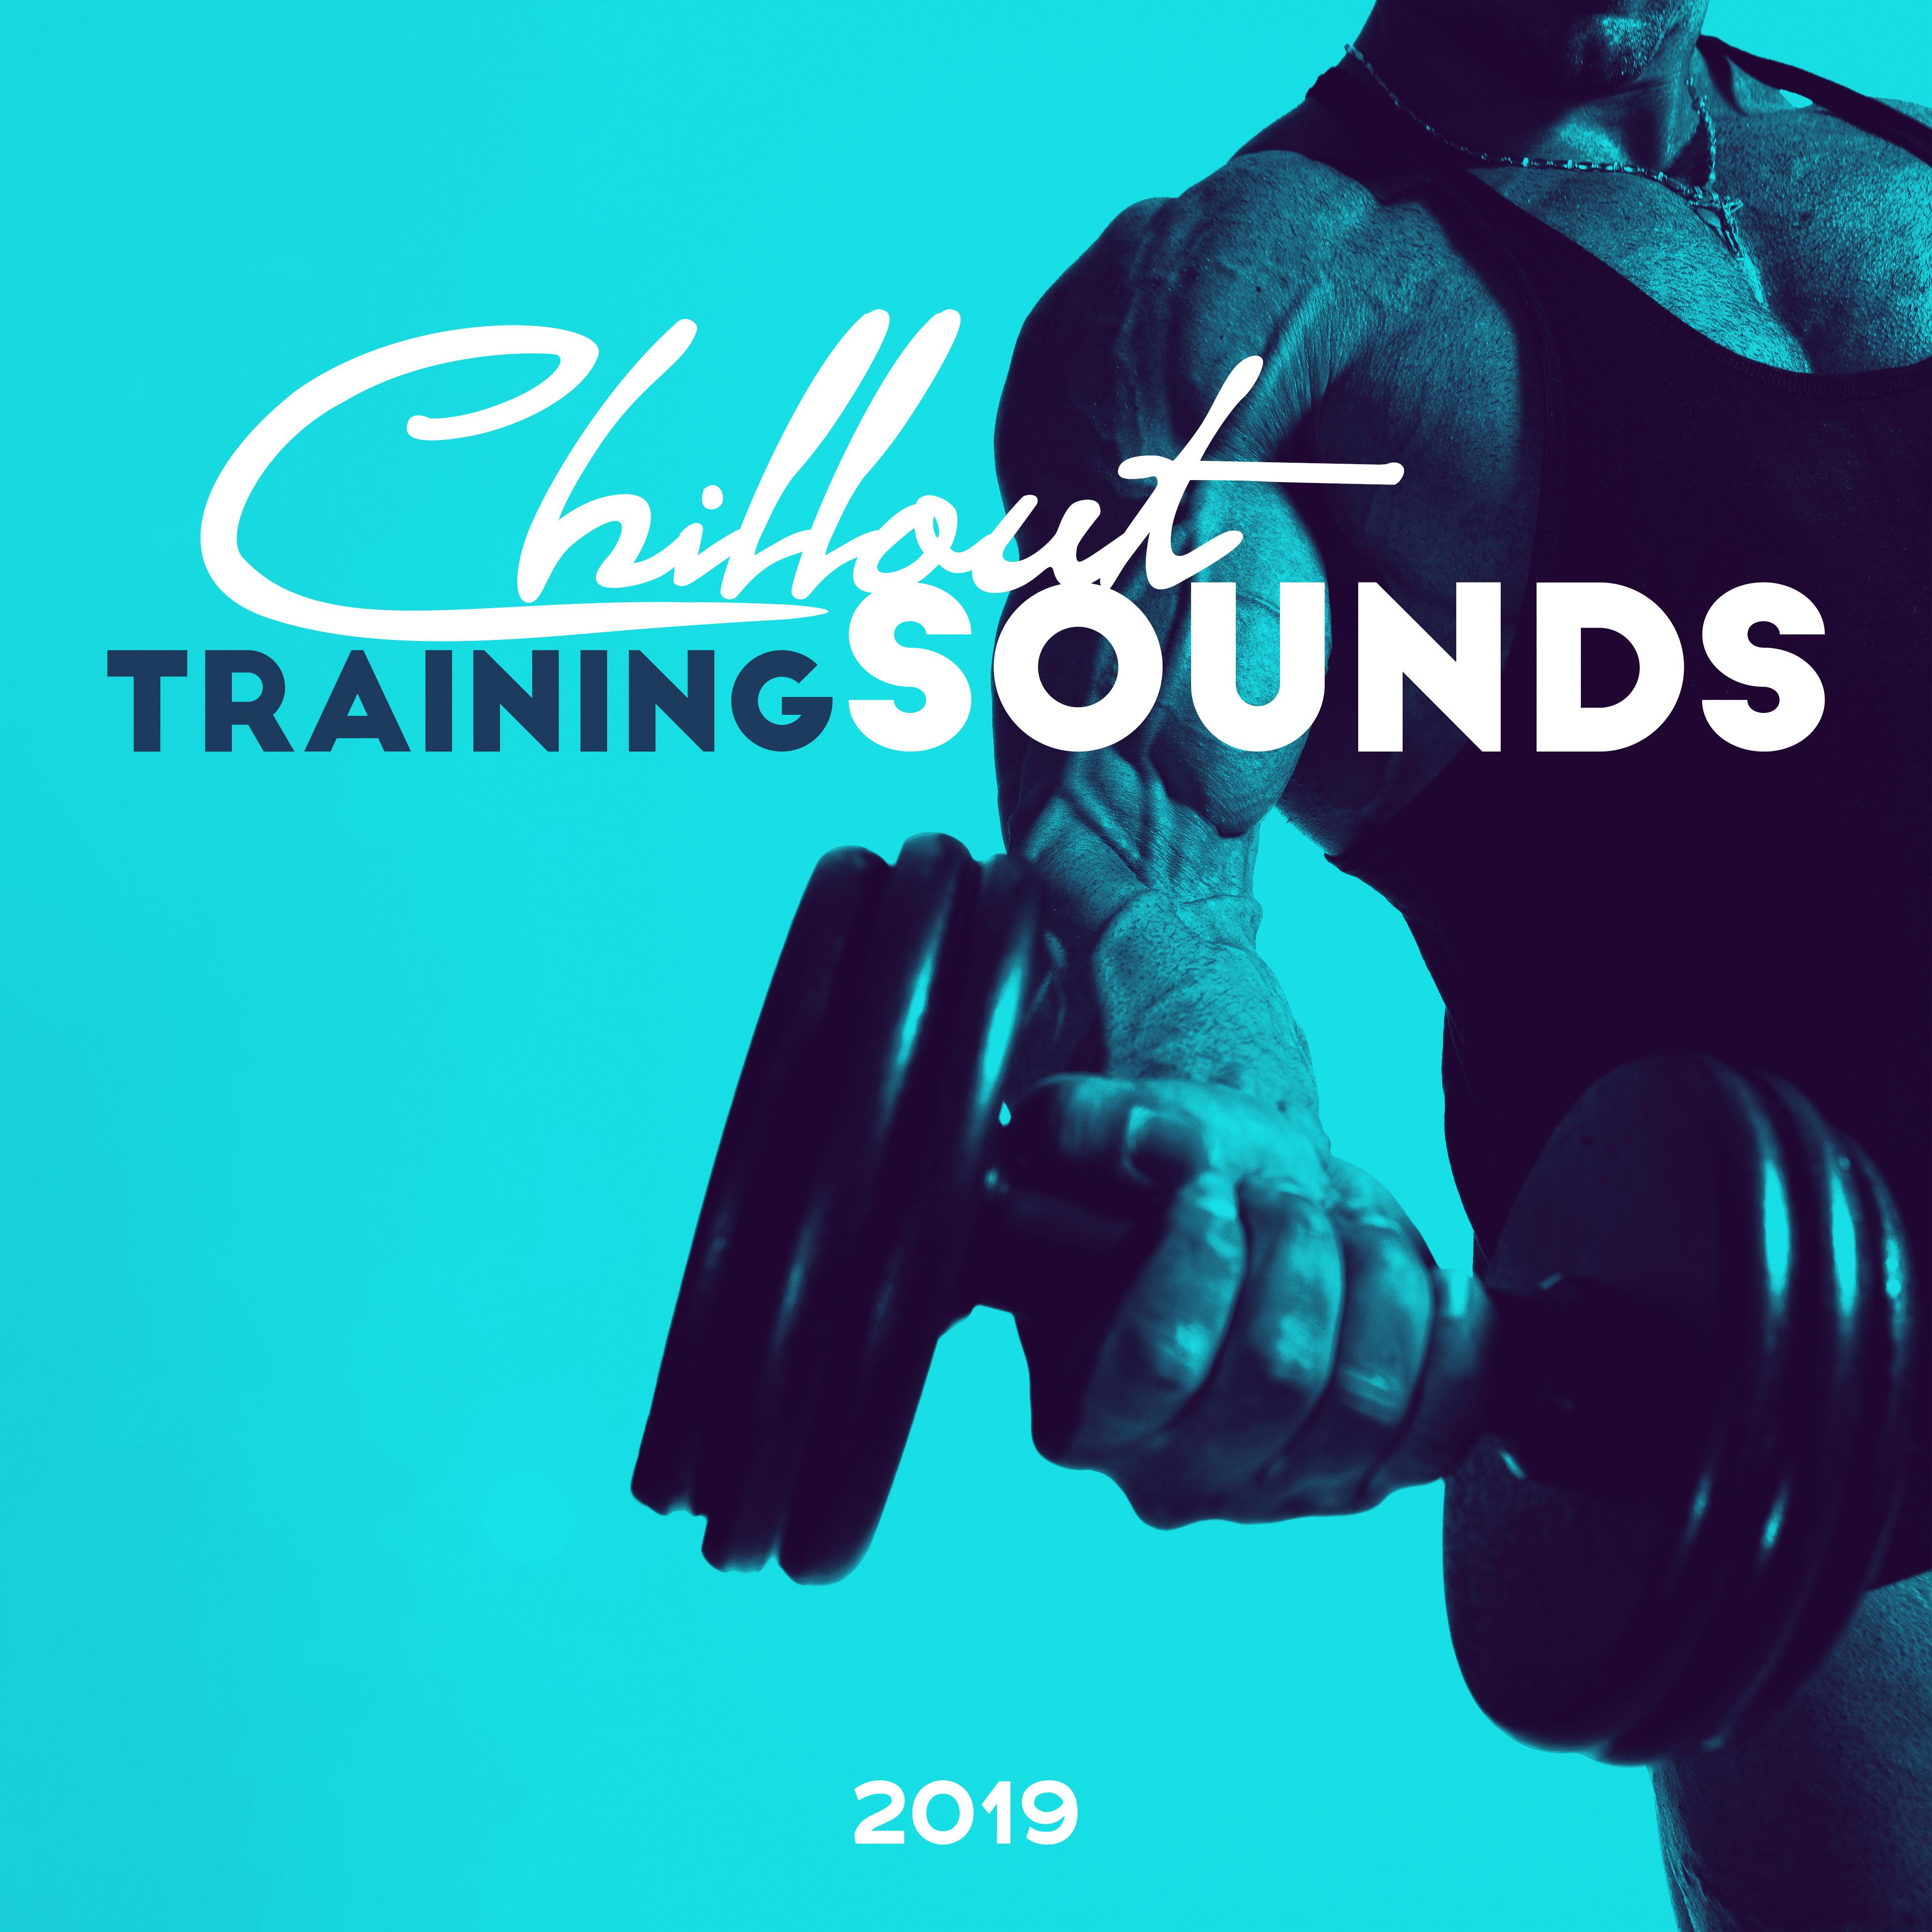 Chillout Training Sounds 2019: 15 Motivational Songs for Workout & Jogging Session